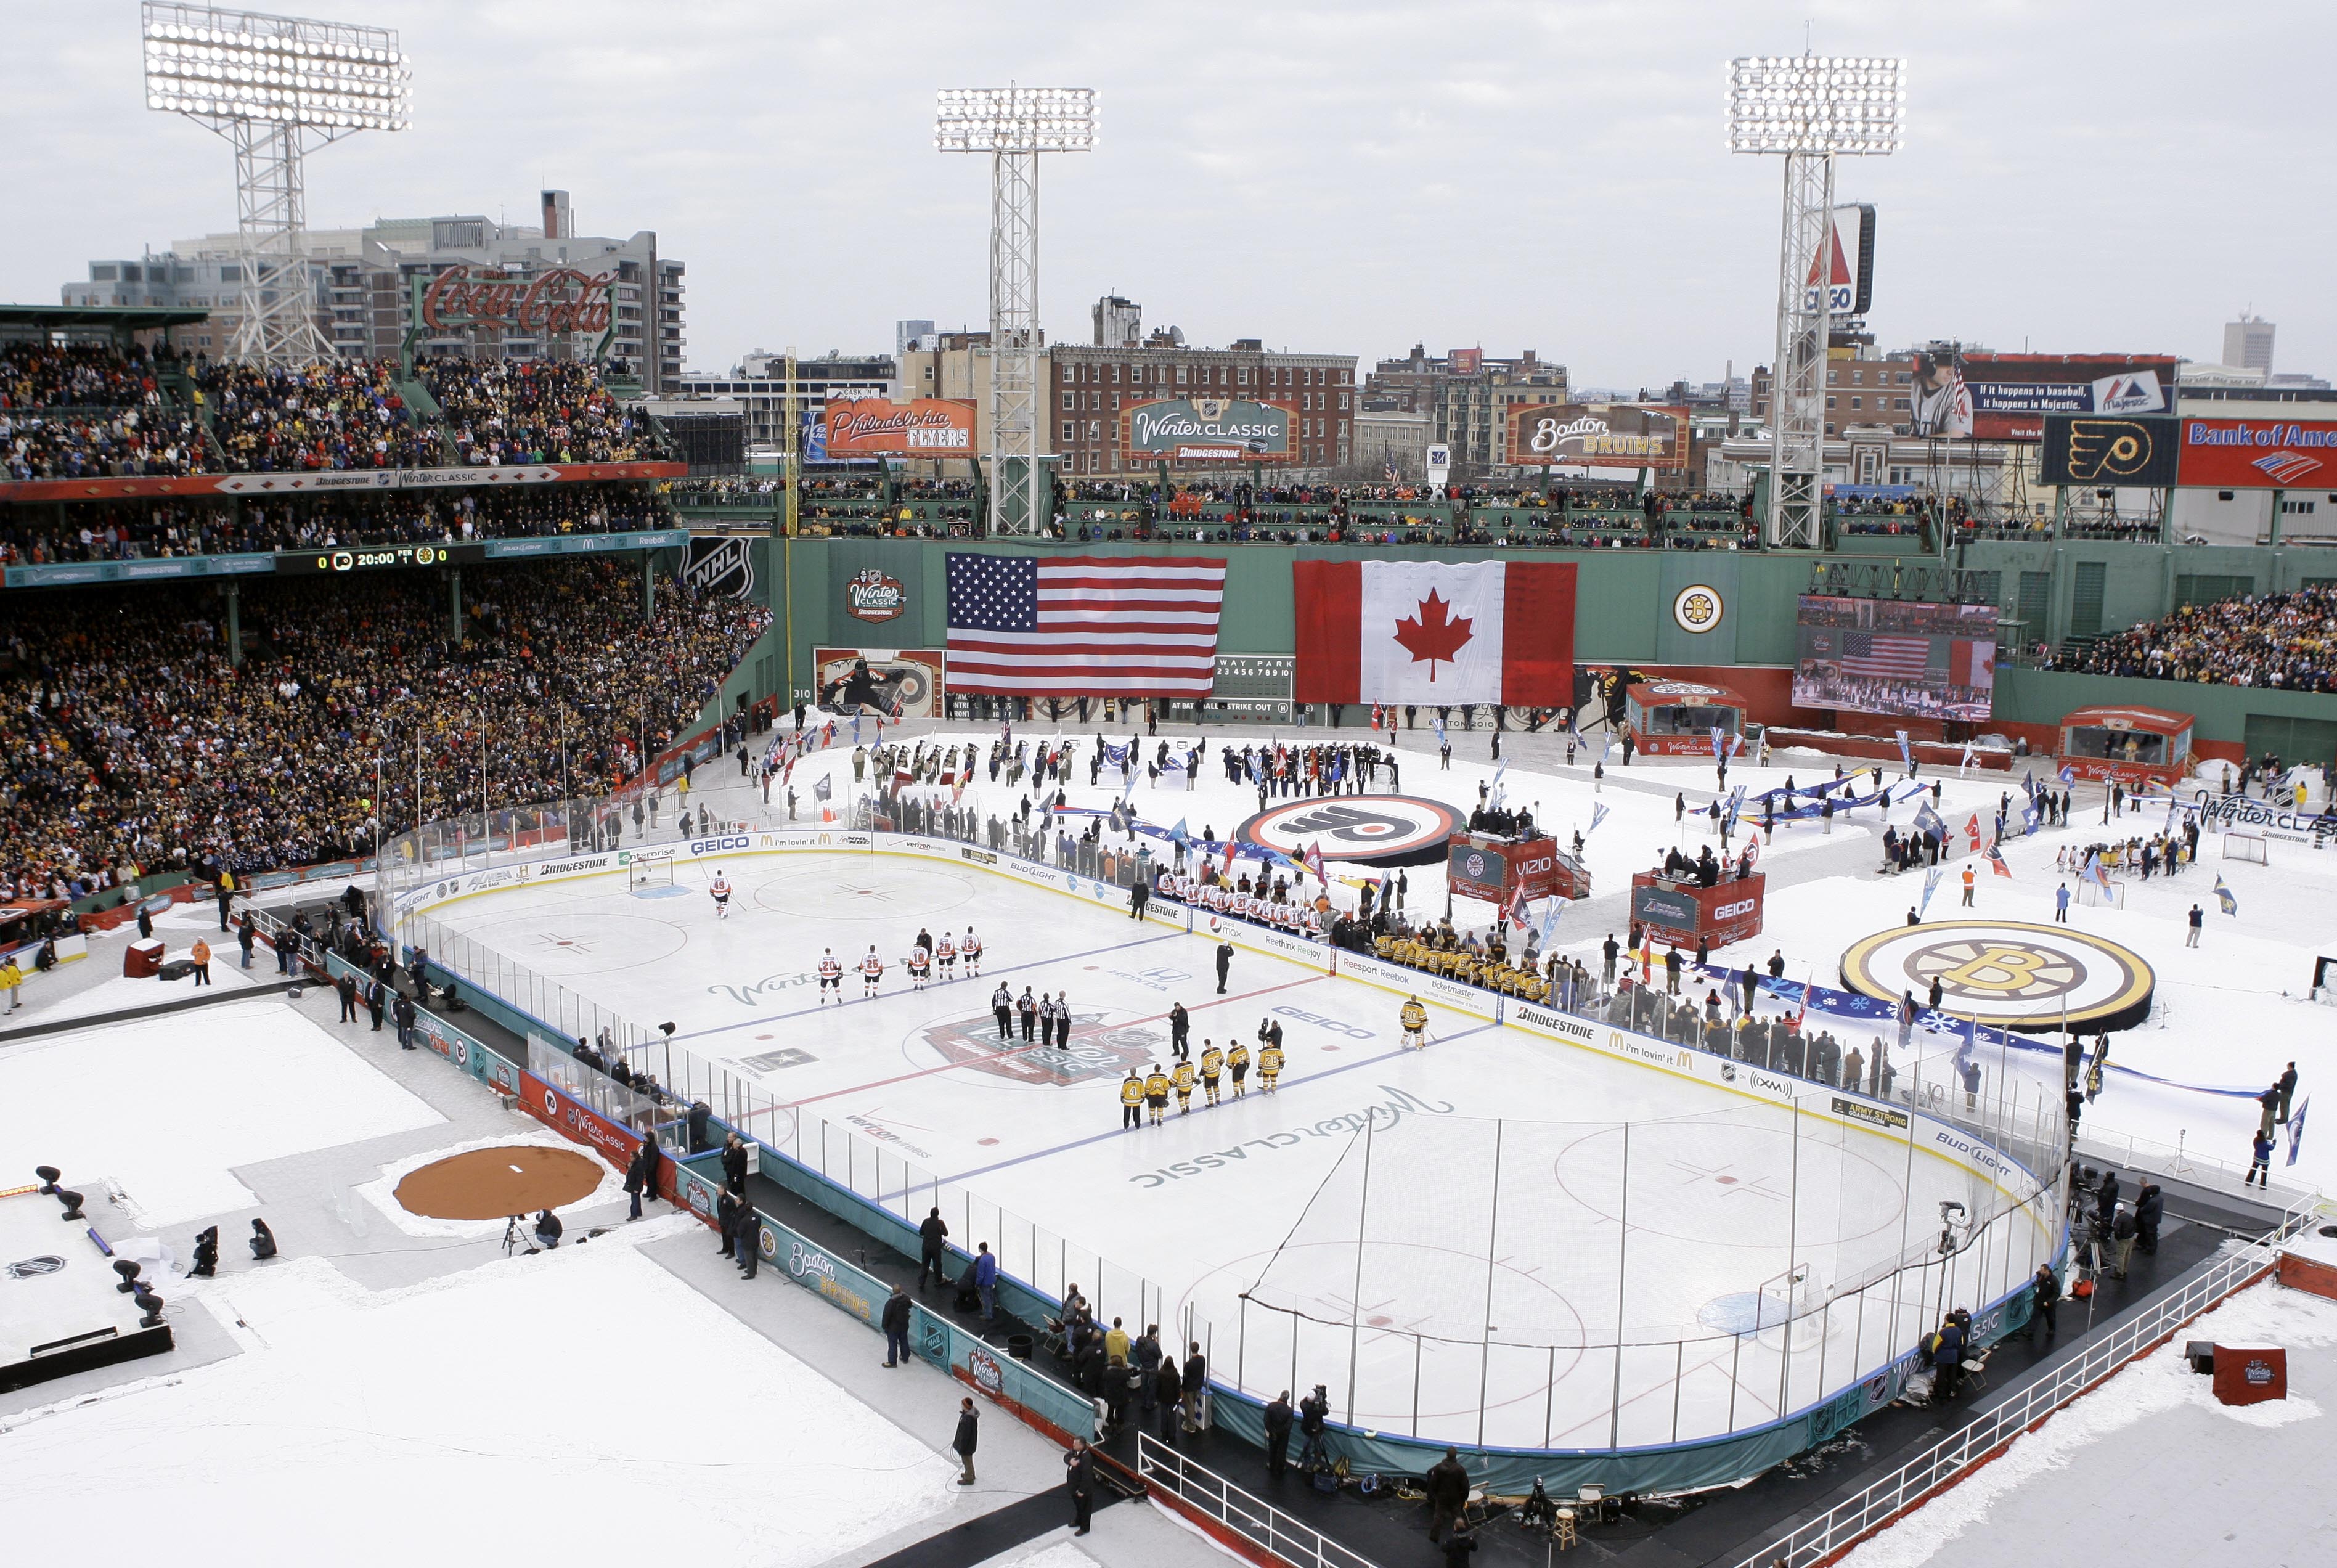 Fenway on full display for the NHL Winter Classic between the